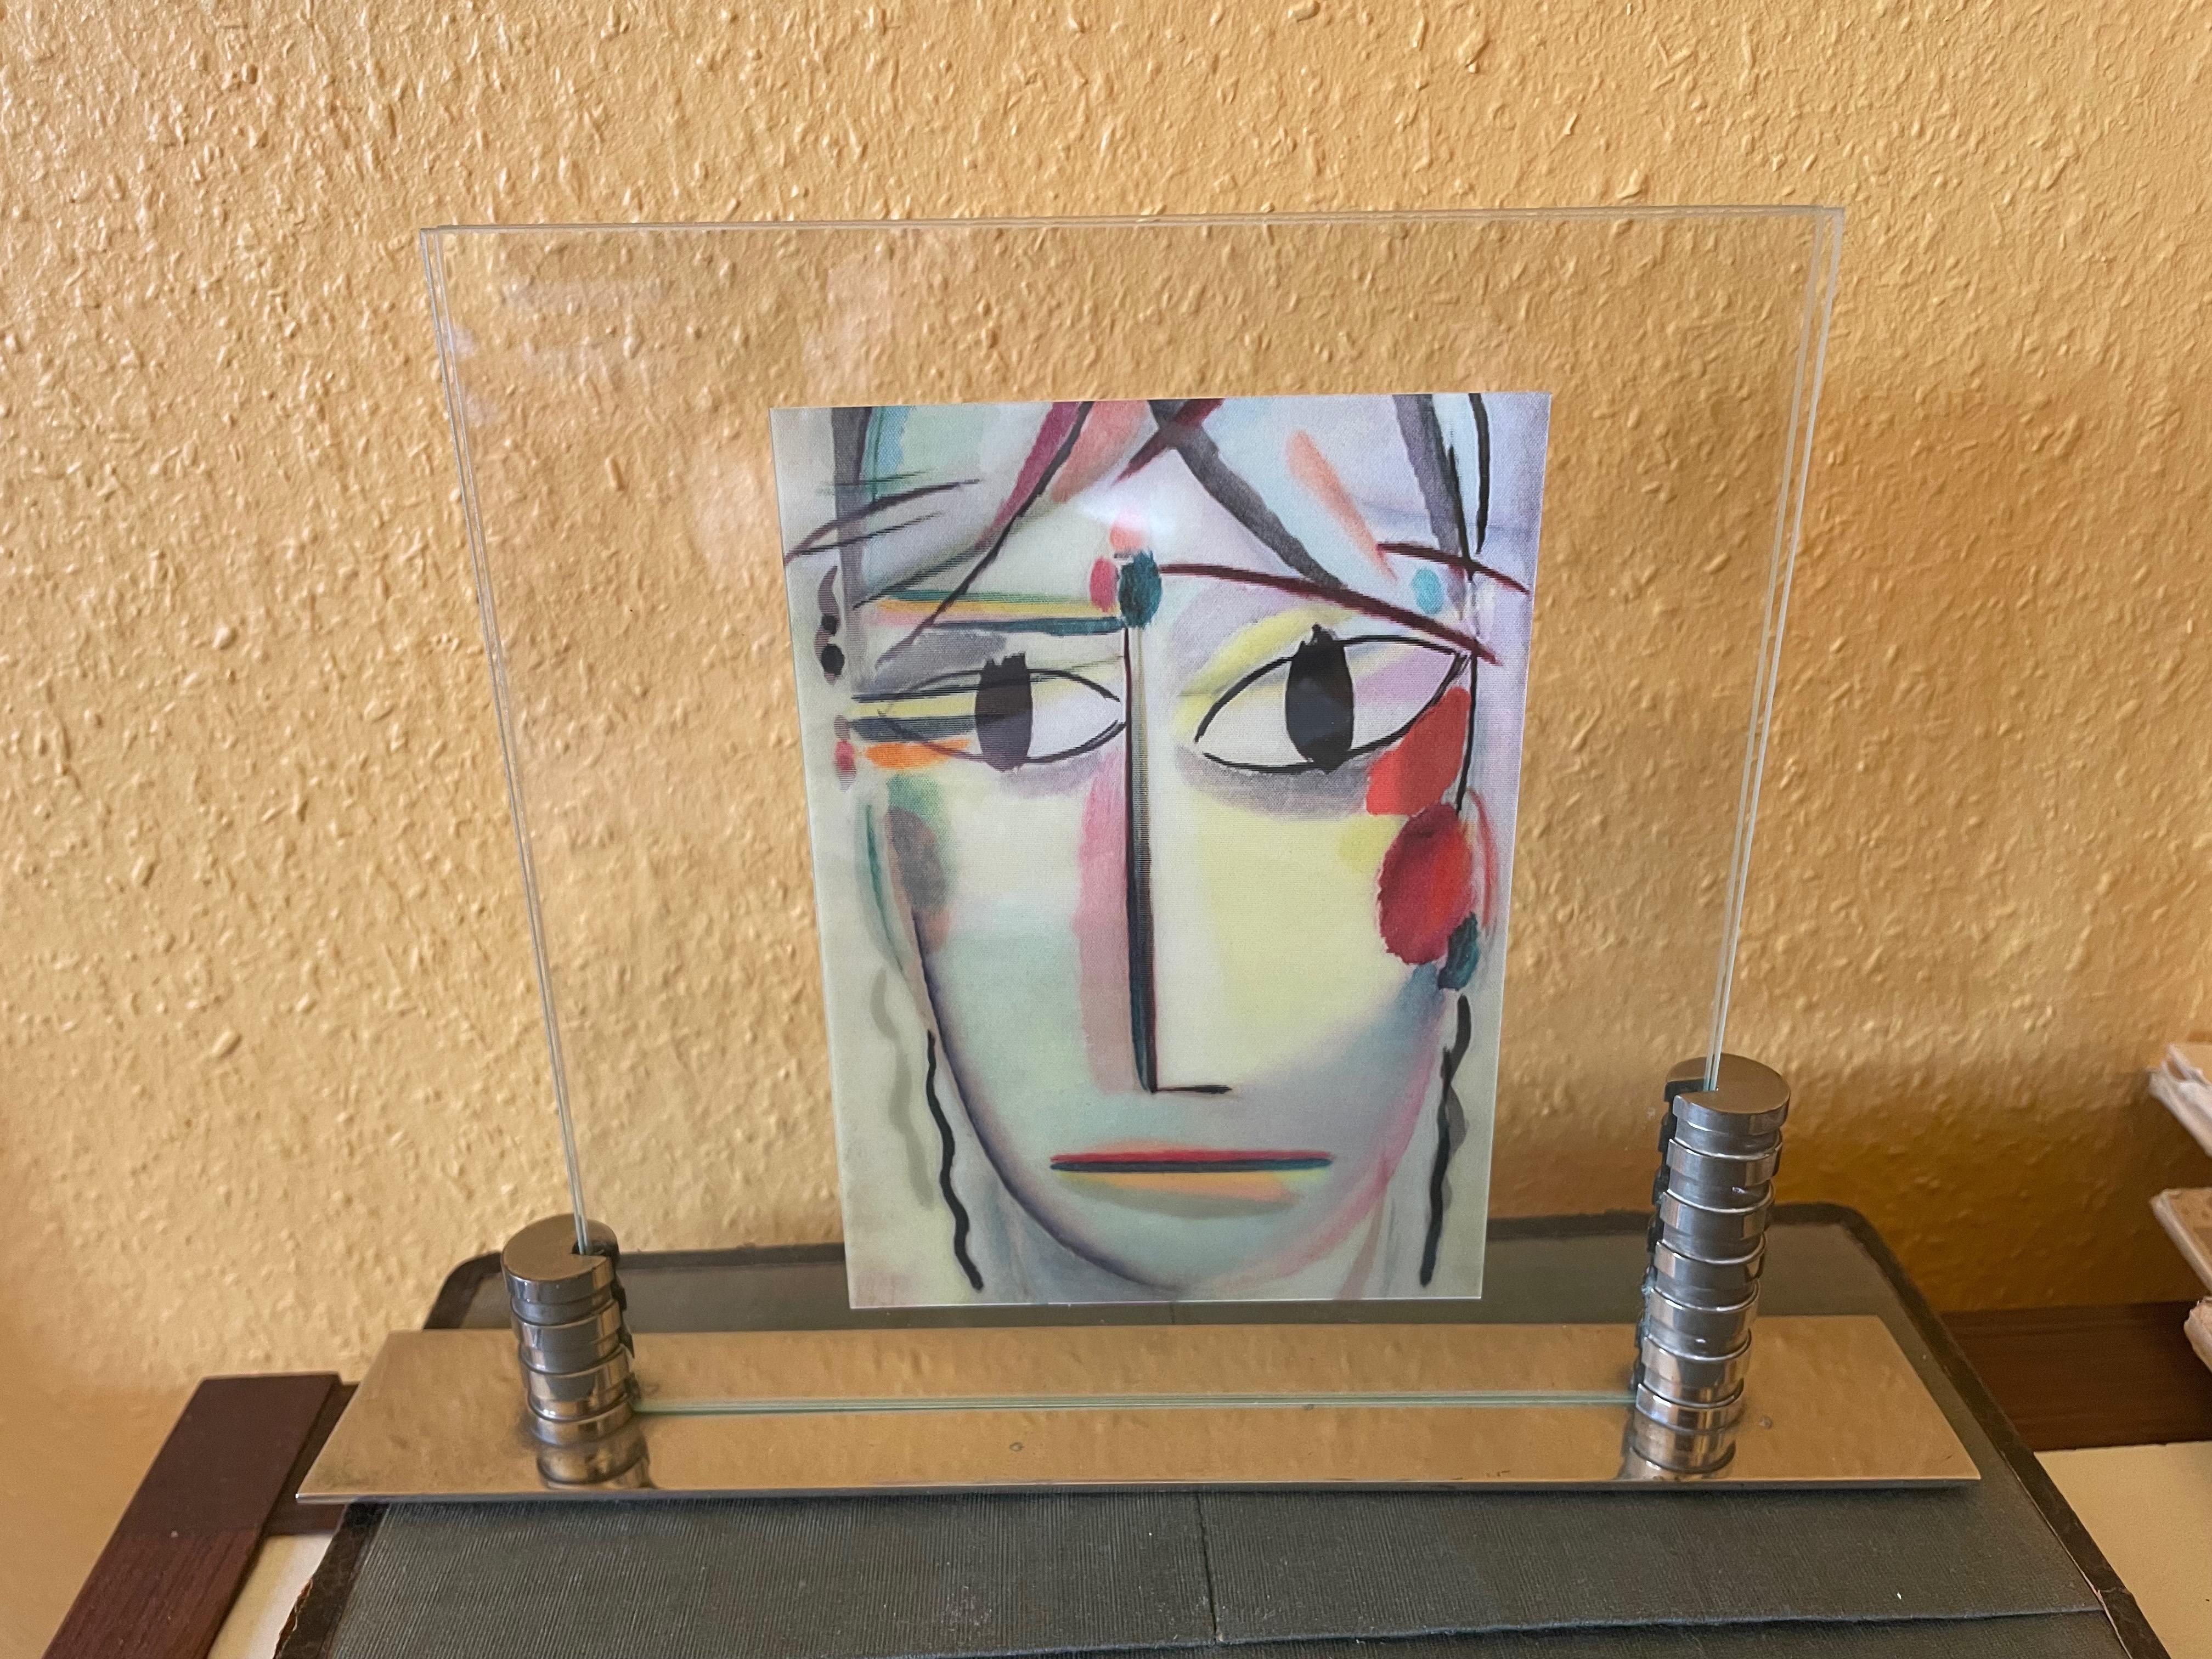 Modernist Art Déco picture frame. France 1920s. 
Nickel plated. Classic modernist Design.
Very good heavy quality. 
Glasses made afterwards.
The dimensions refer to the frame.
The glasses are 18 cm wide and 19 cm high.
The postcard is only a